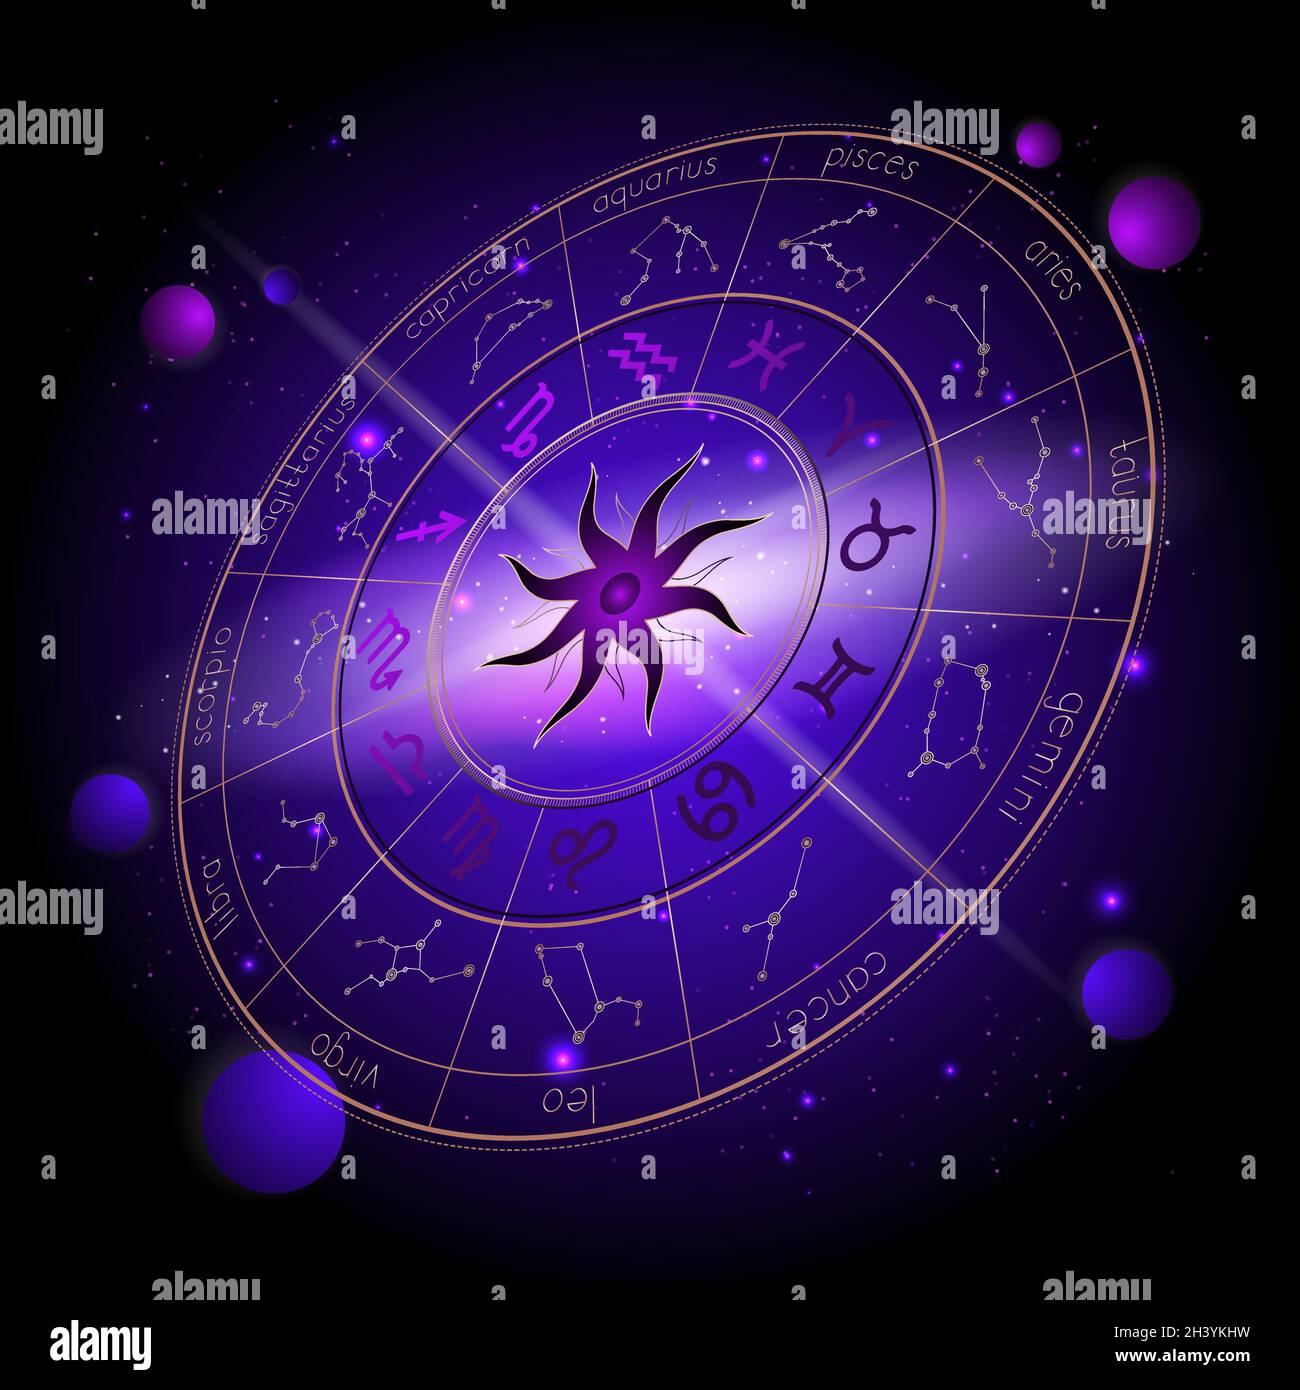 Vector illustration of Horoscope circle in perspective, Zodiac signs and astrology constellations against the space background with planets, stars and Stock Vector